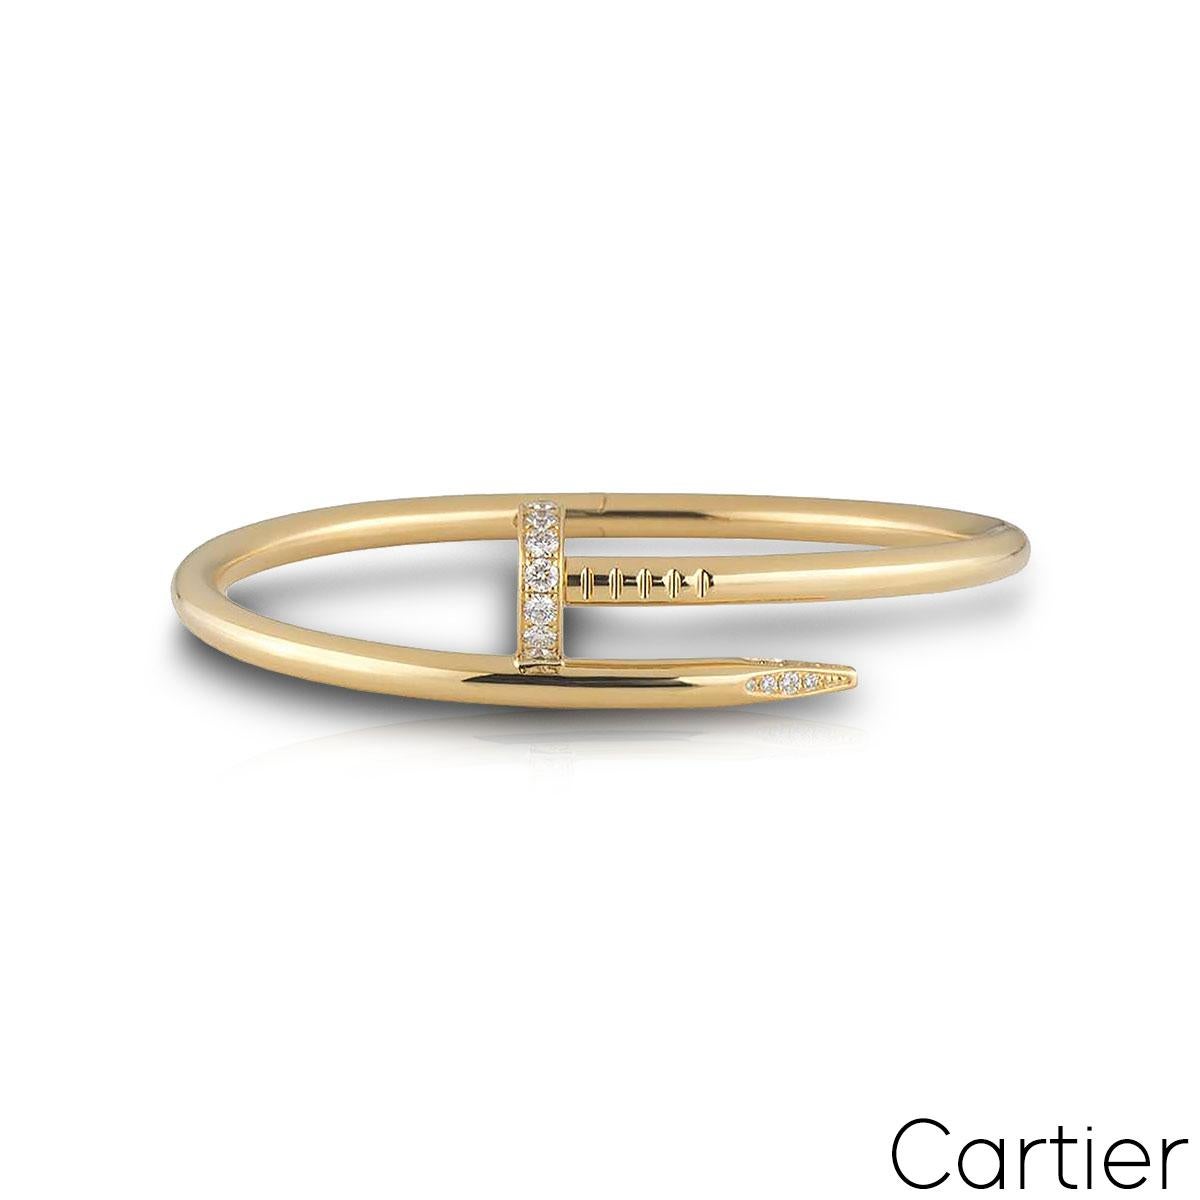 An 18k yellow gold Cartier diamond bracelet from the Juste Un Clou collection. The bracelet is in the style of a nail and has 27 round brilliant cut pave diamonds set in the head and tip, totaling 0.54ct. The diamonds are predominantly F colour and